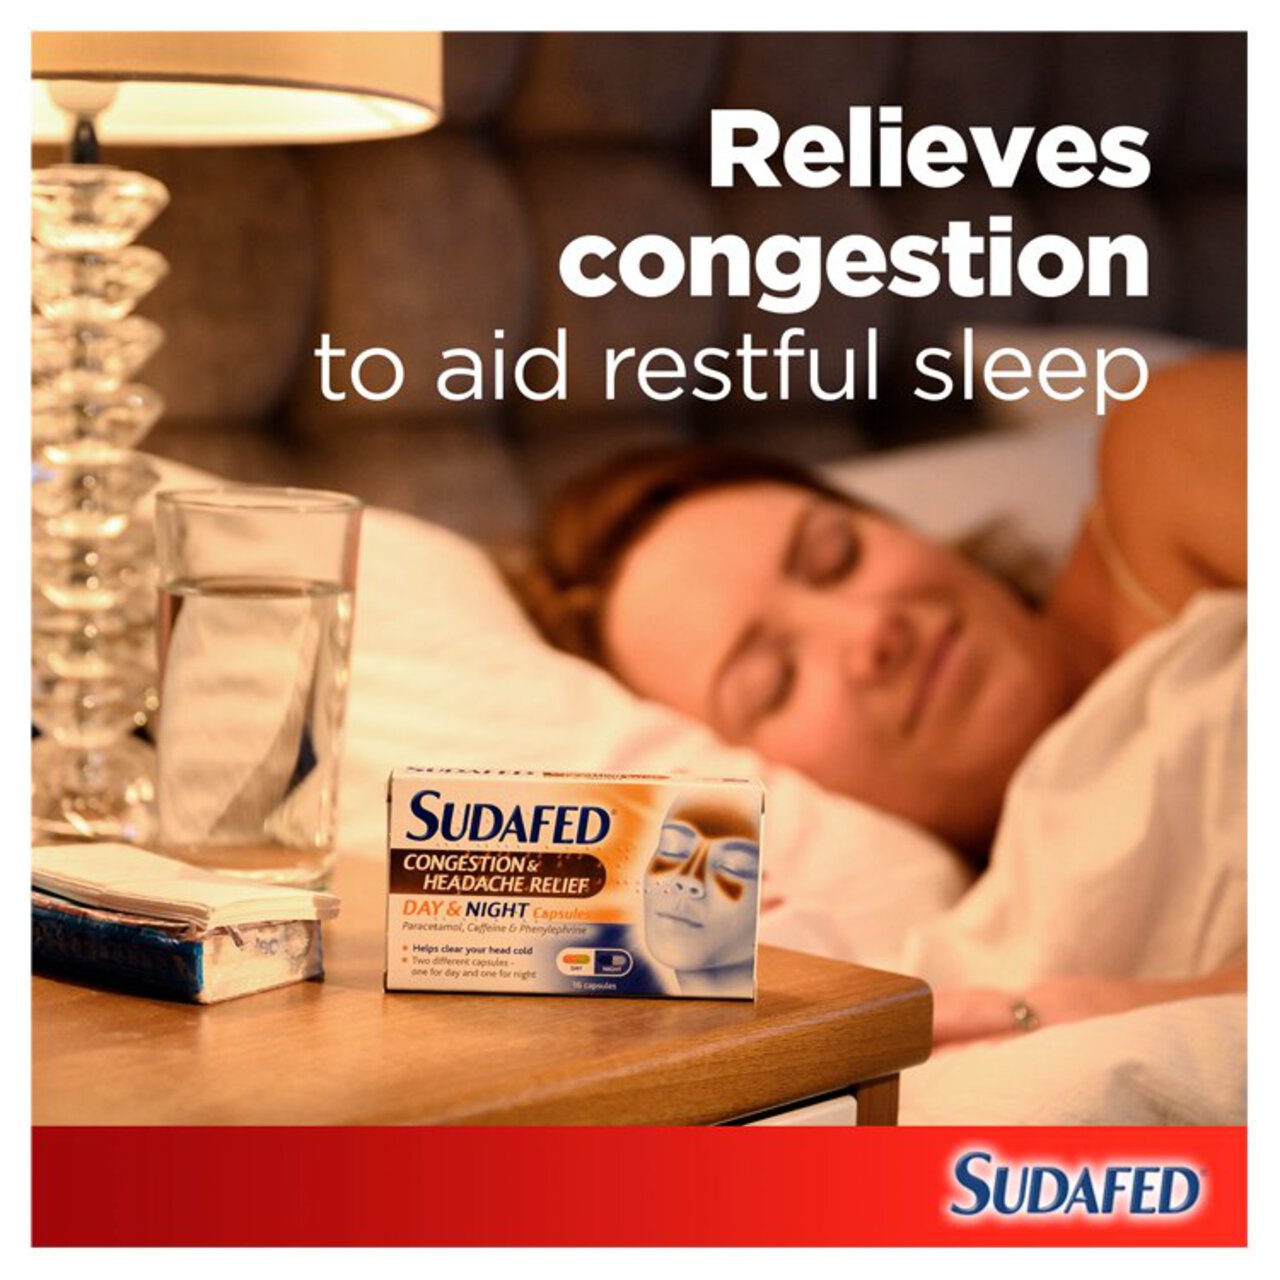 Sudafed Congestion Headache Relief Day & Night Capsules 16 per pack